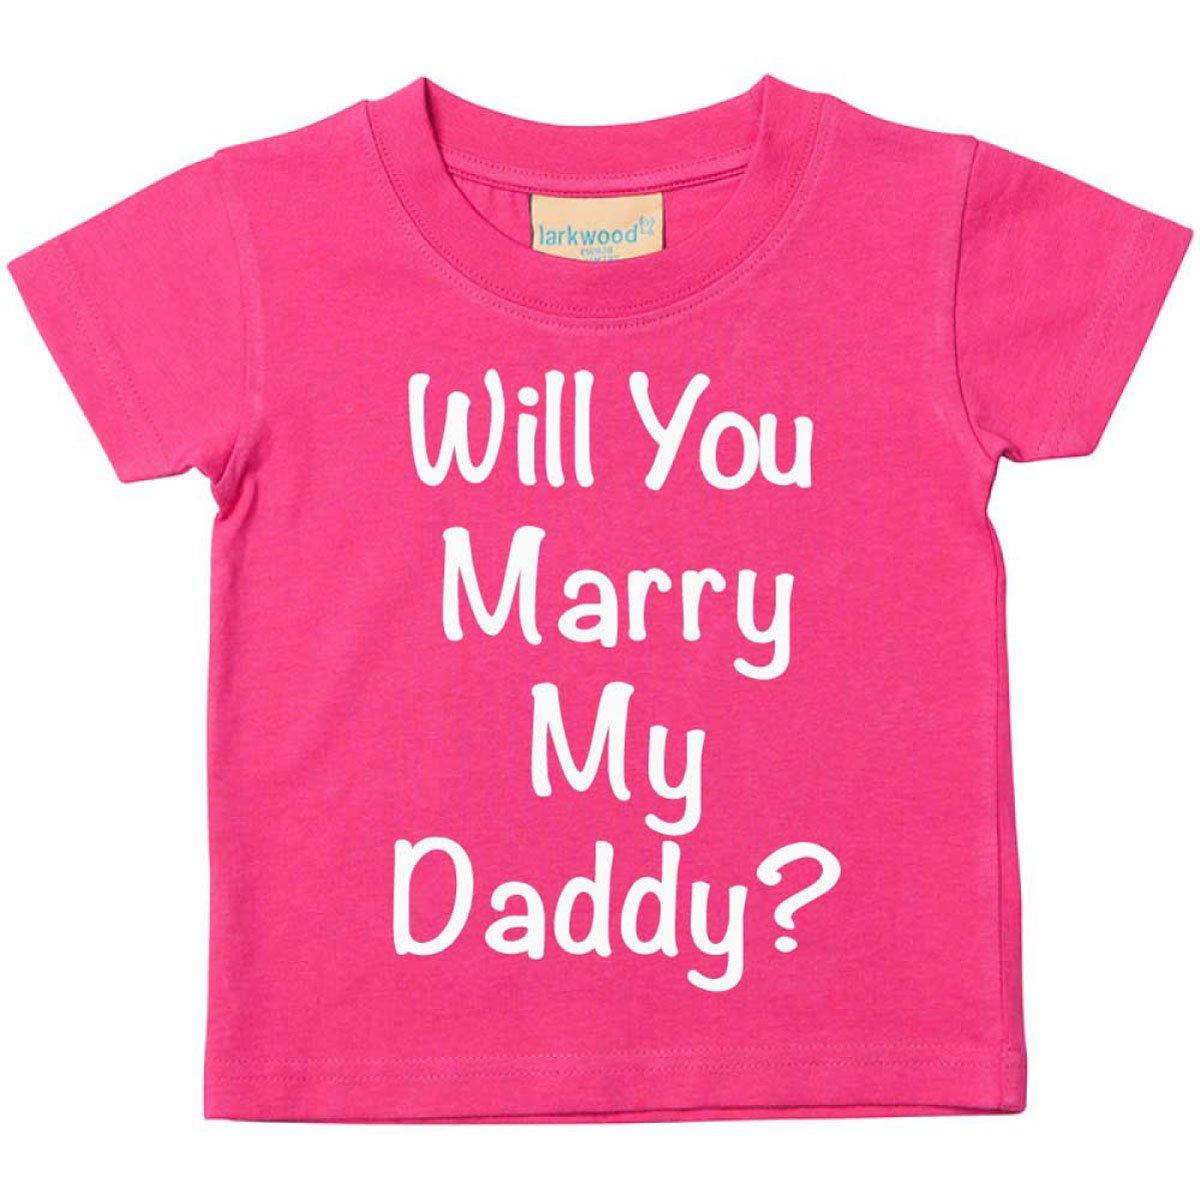 Will You Marry My Daddy? Pink Tshirt